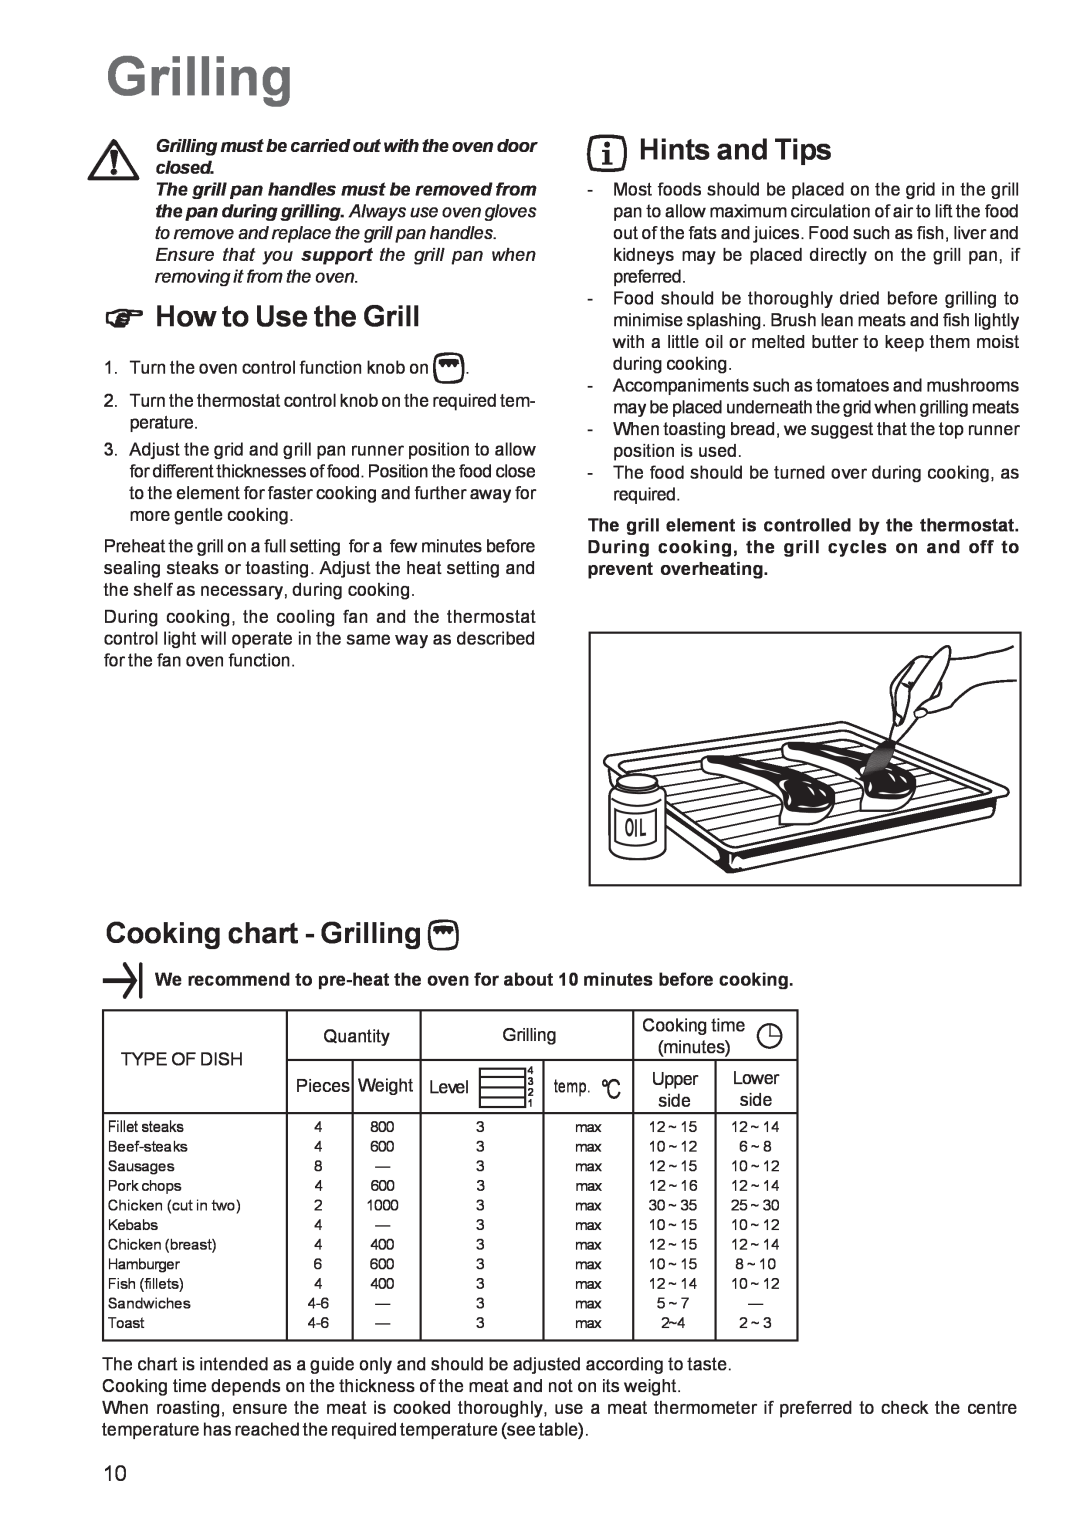 Electrolux EOB 5700 manual How to Use the Grill, Cooking chart - Grilling, Hints and Tips 